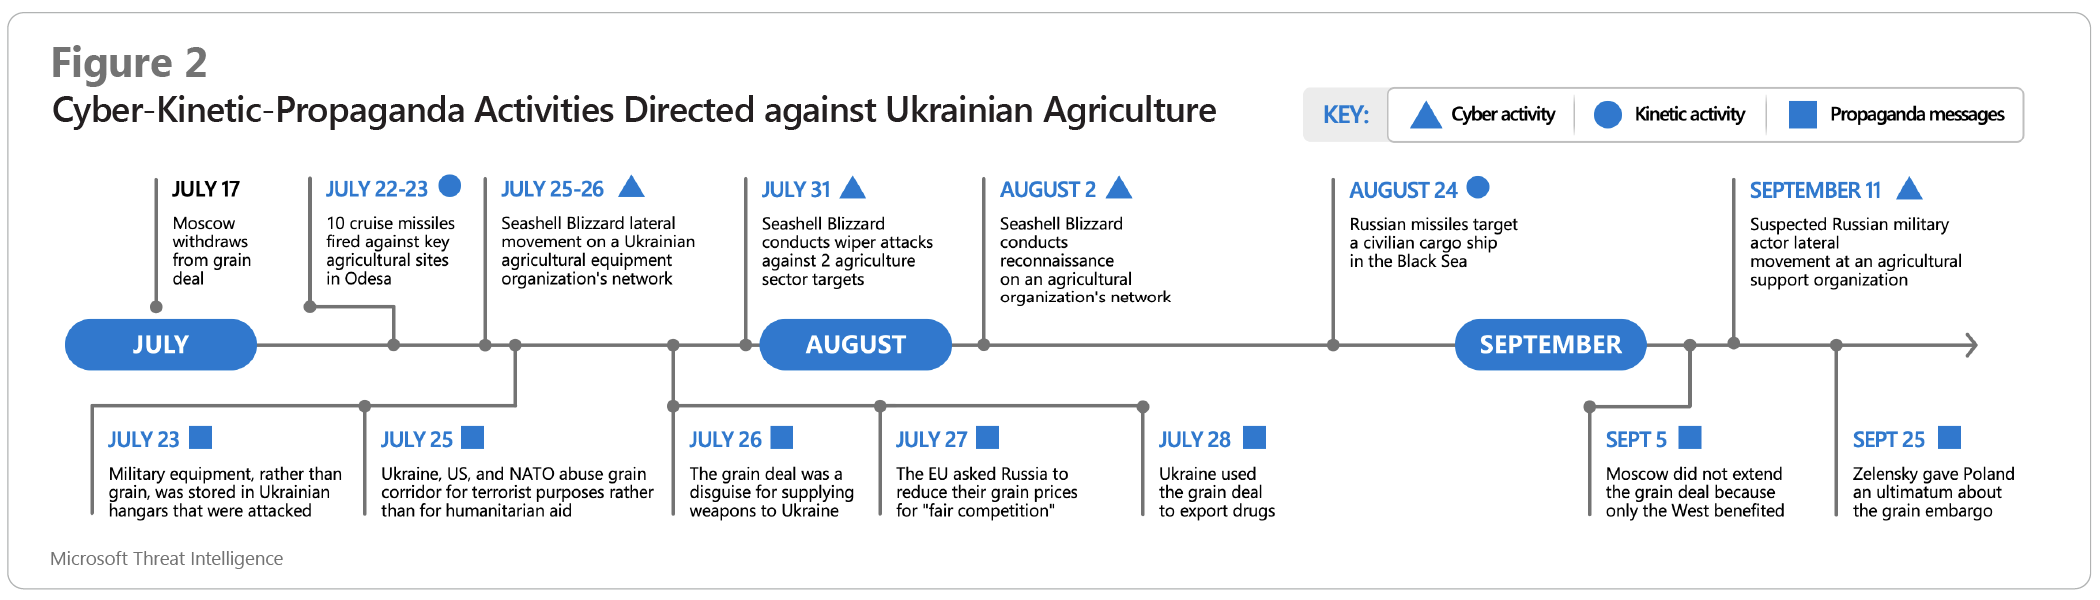 Cyber-kinetic-propaganda activities directed against Ukrainian agriculture